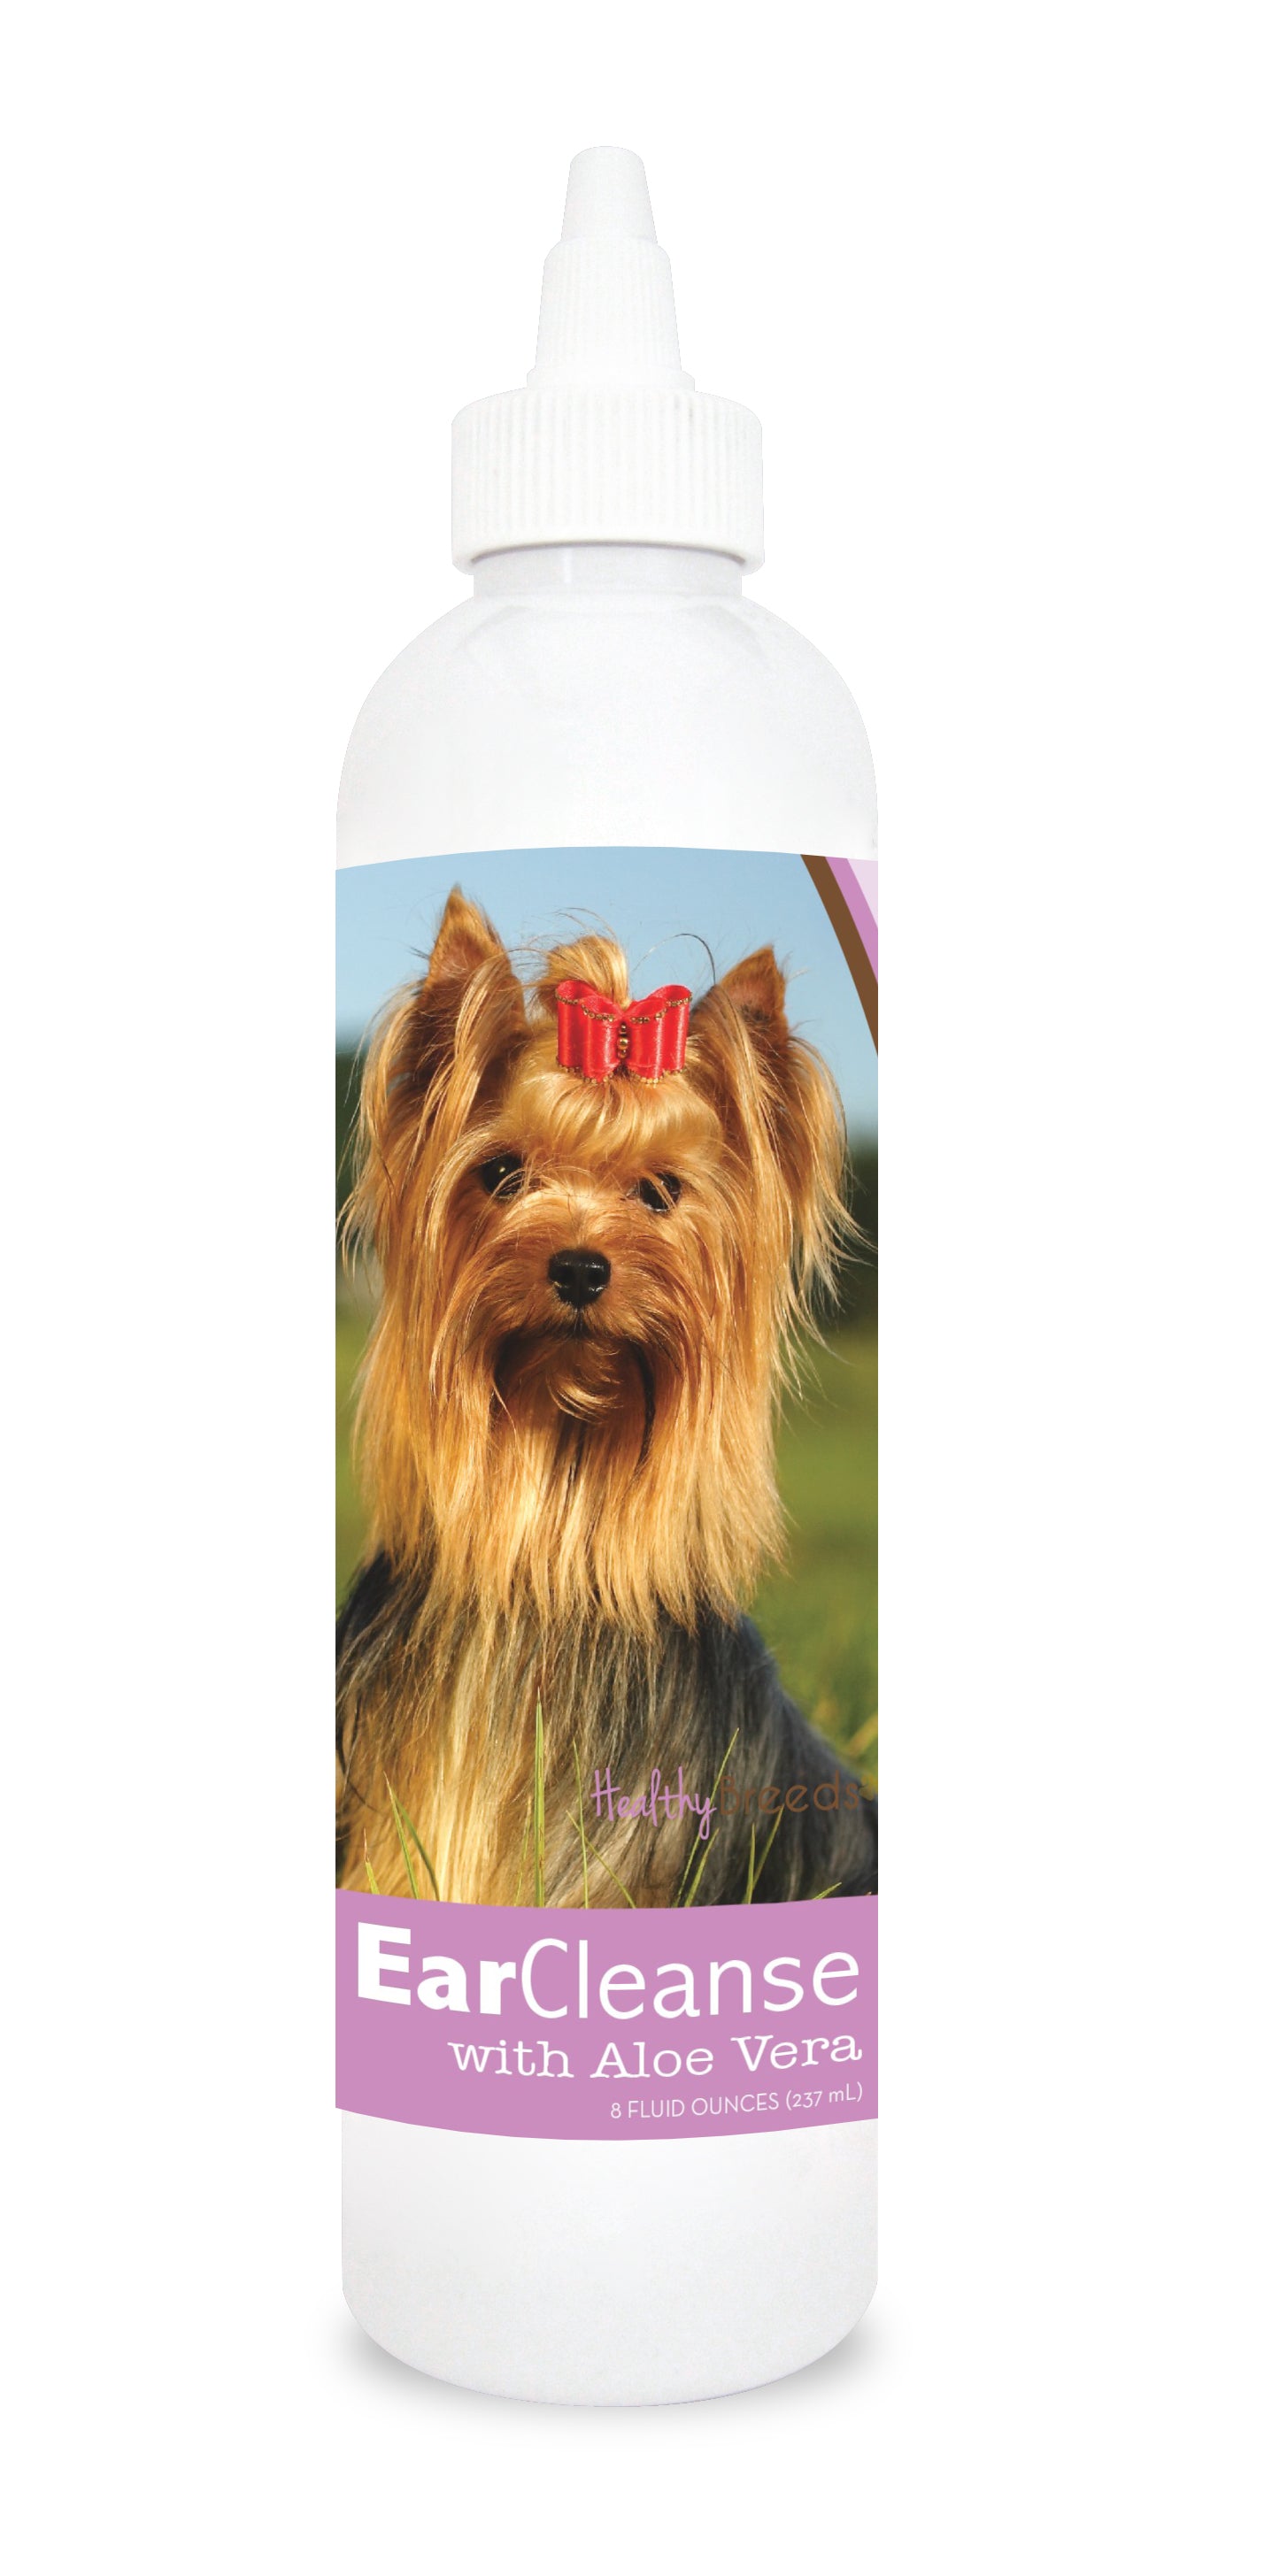 Yorkshire Terrier Ear Cleanse with Aloe Vera Sweet Pea and Vanilla 8 oz